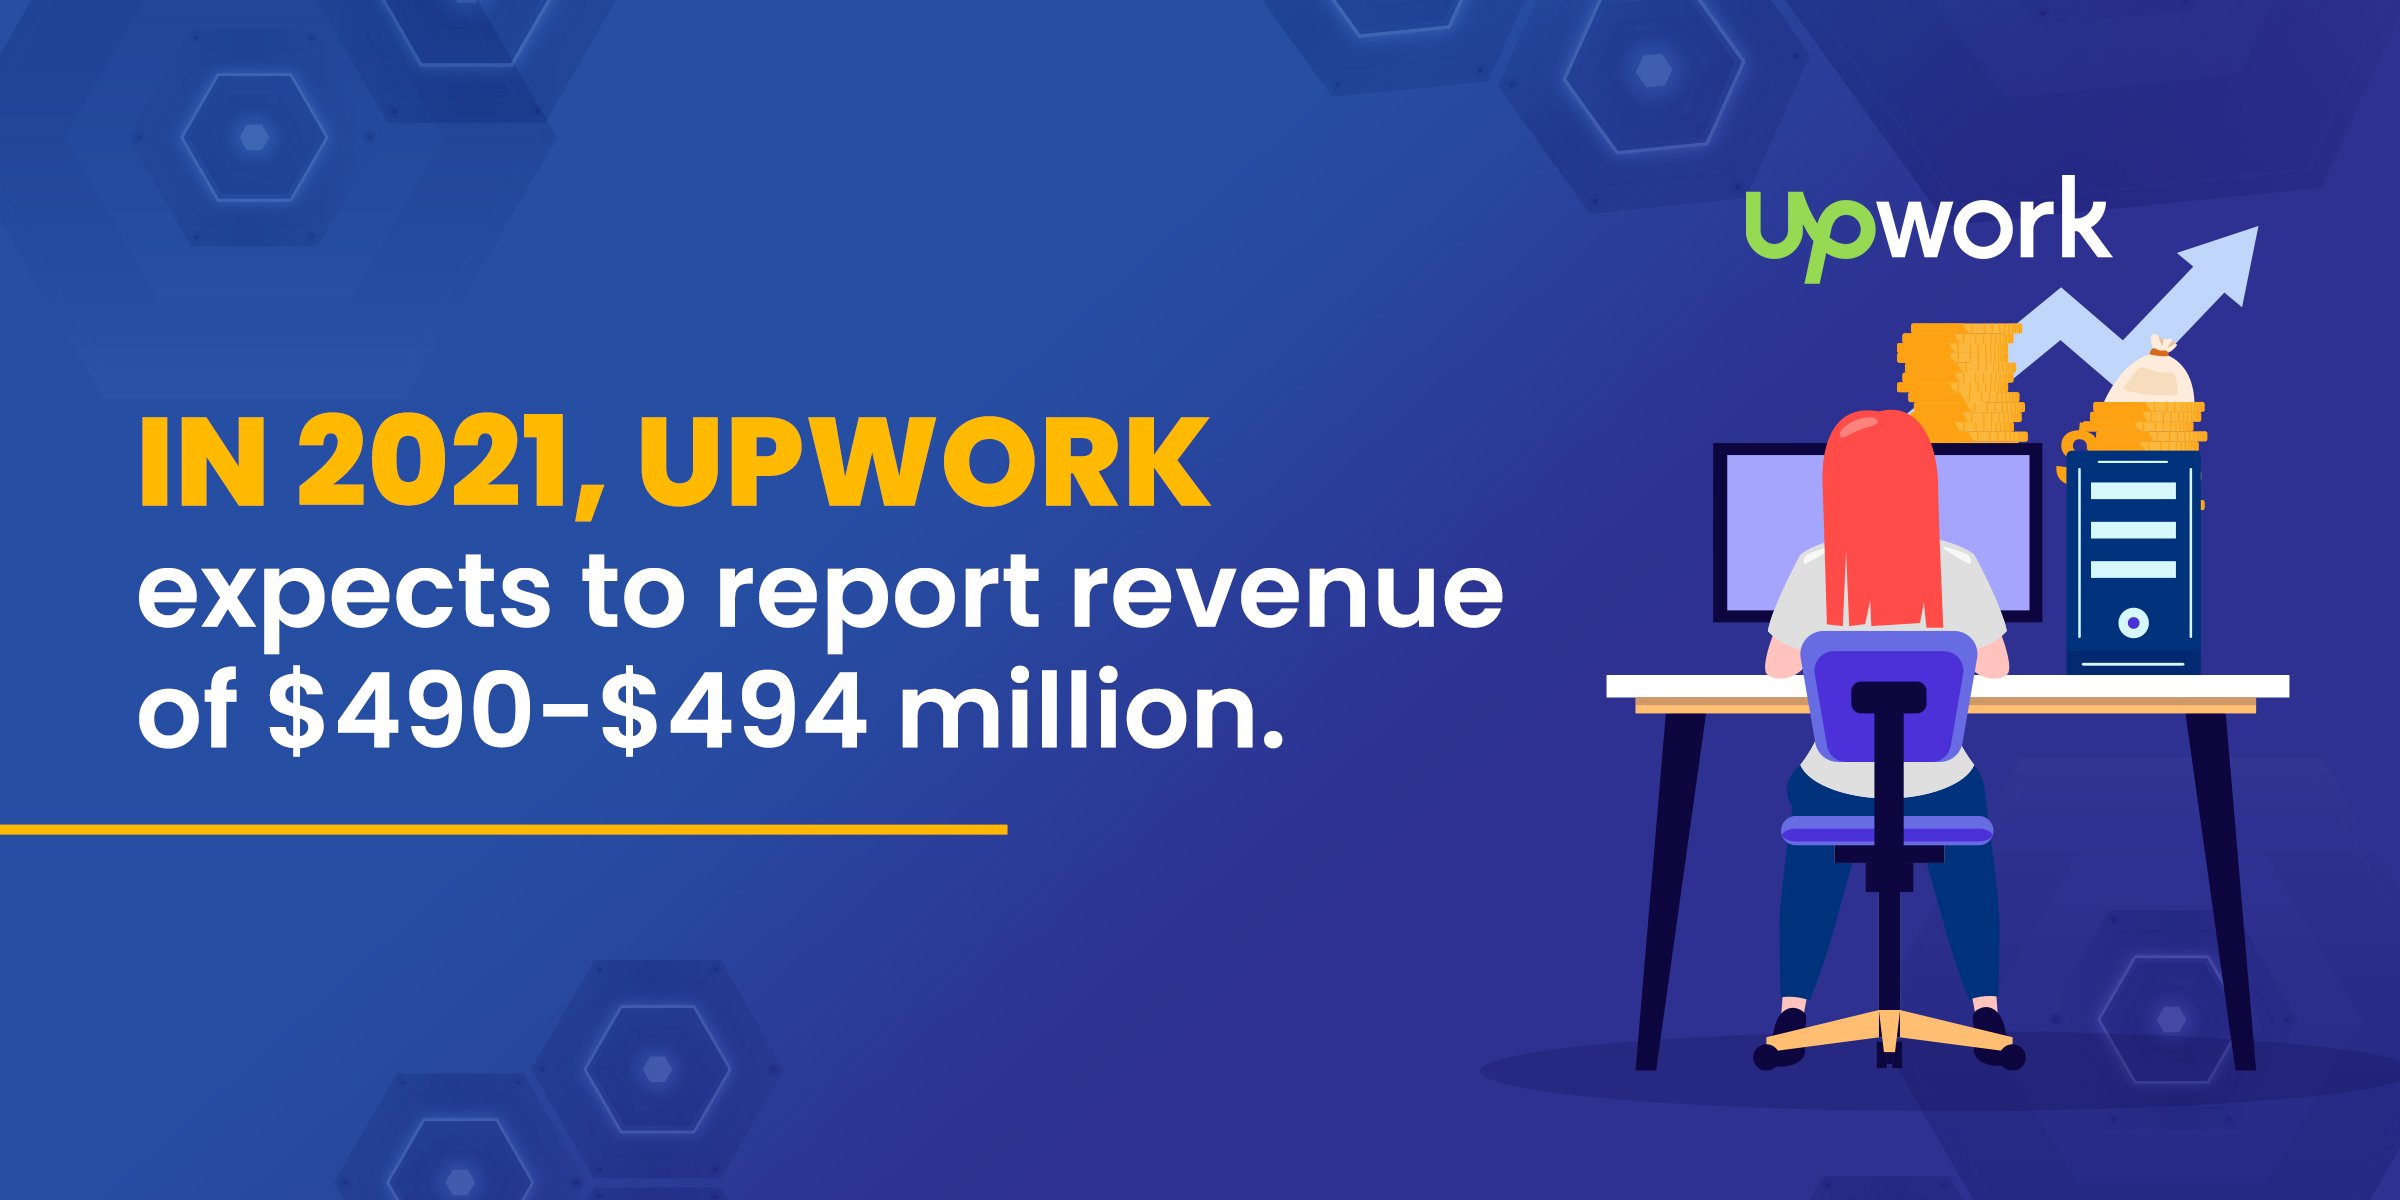 Freelance Statistics - In 2021, Upwork expects to report revenue of $490-$494 million